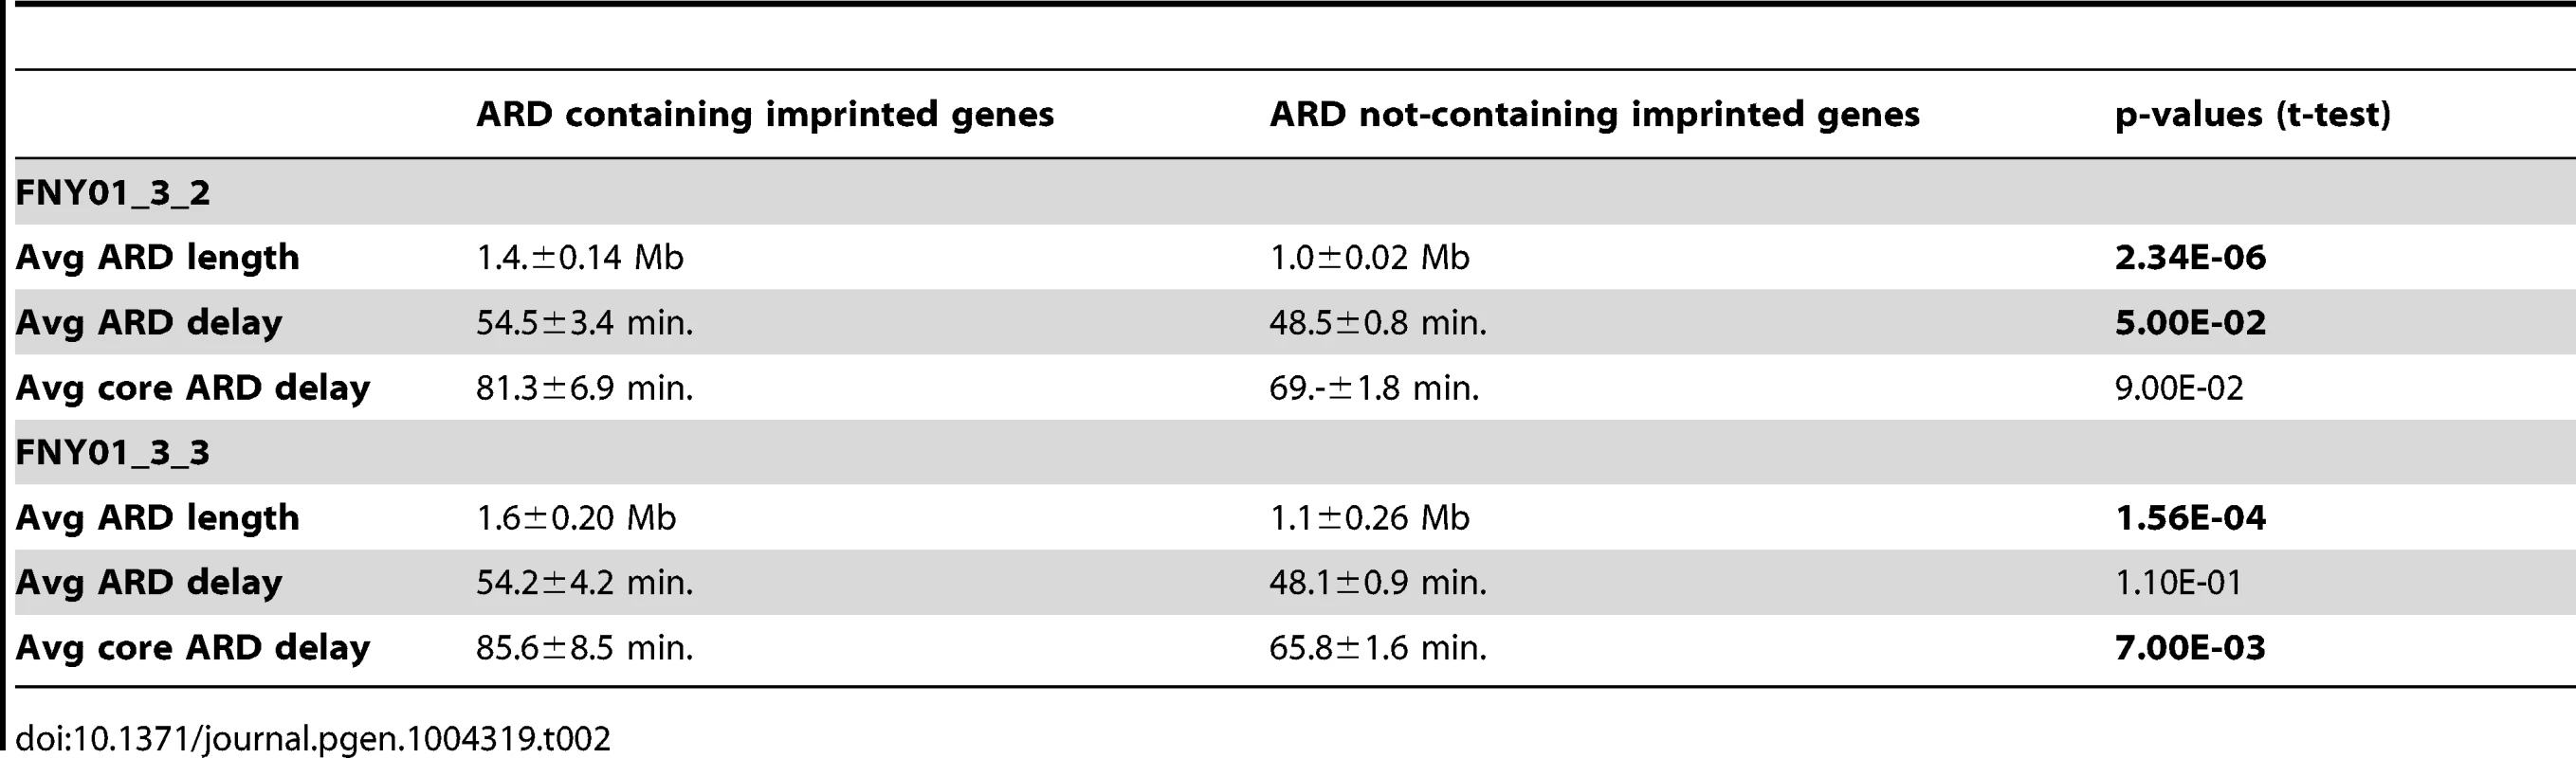 Comparison of ARD containing and not containing imprinted genes.